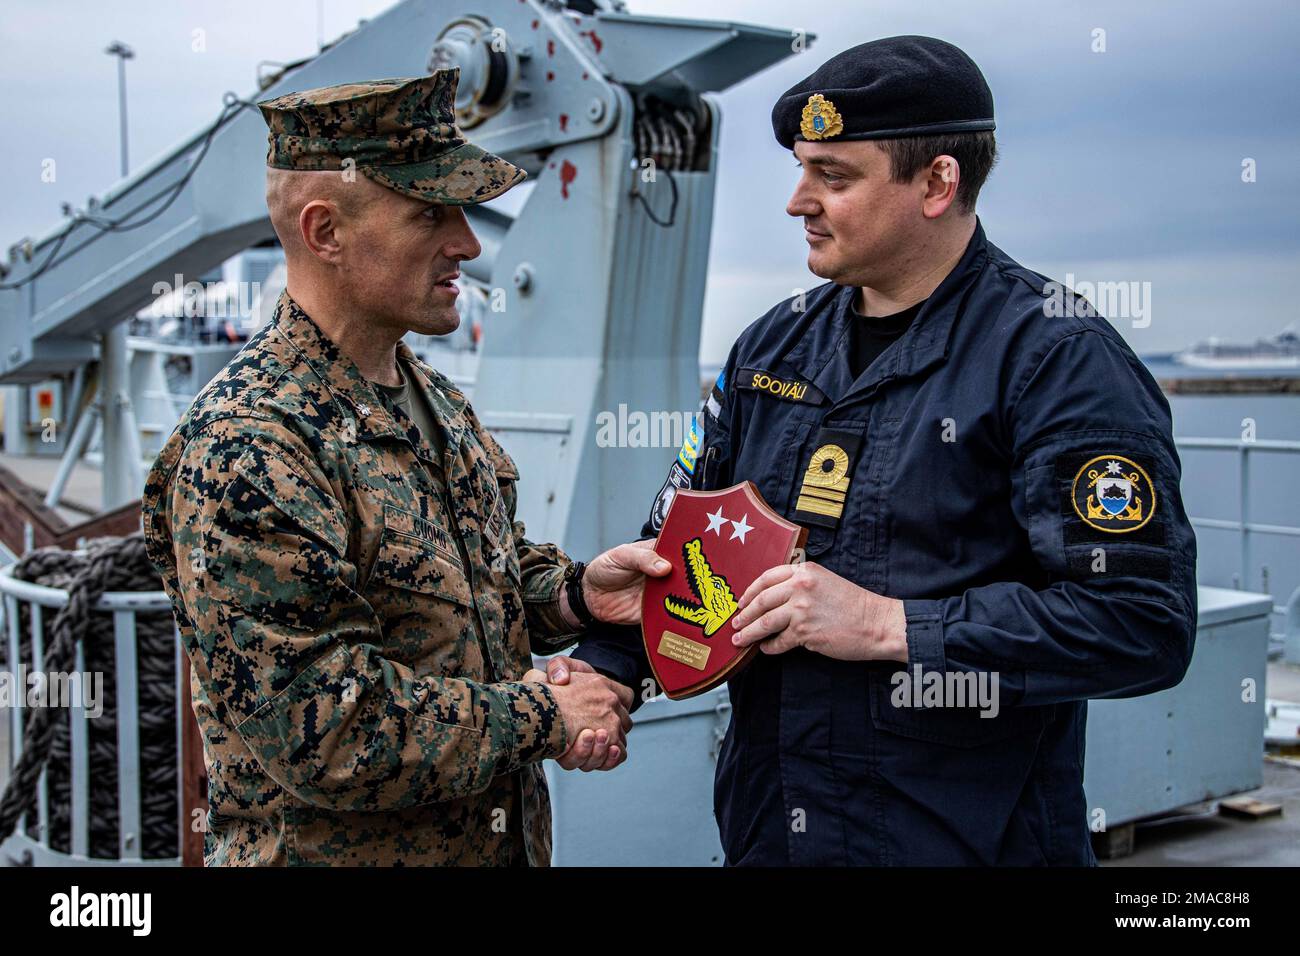 U.S. Marine Corps Lt. Col. Scott Cuomo, commanding officer for 2d Light Armored Reconnaissance Battalion, presents a gift to Lieutenant Senior Grade Krister Soovali, captain of the ENS Wambola, for hosting the Marines of Task Group 61/2.4, during experimentation of Maritime Domain Awareness aboard the ENS Wambola near Tallinn, Estonia, May 25, 2022. Task Group 61/2, Task Force 61/2, provides naval and joint force commanders with dedicated multi-domain reconnaissance and counter-reconnaissance (RXR) capabilities. Task Force 61/2 is executing the Commandant of the Marine Corps’ Concept for Stand Stock Photo